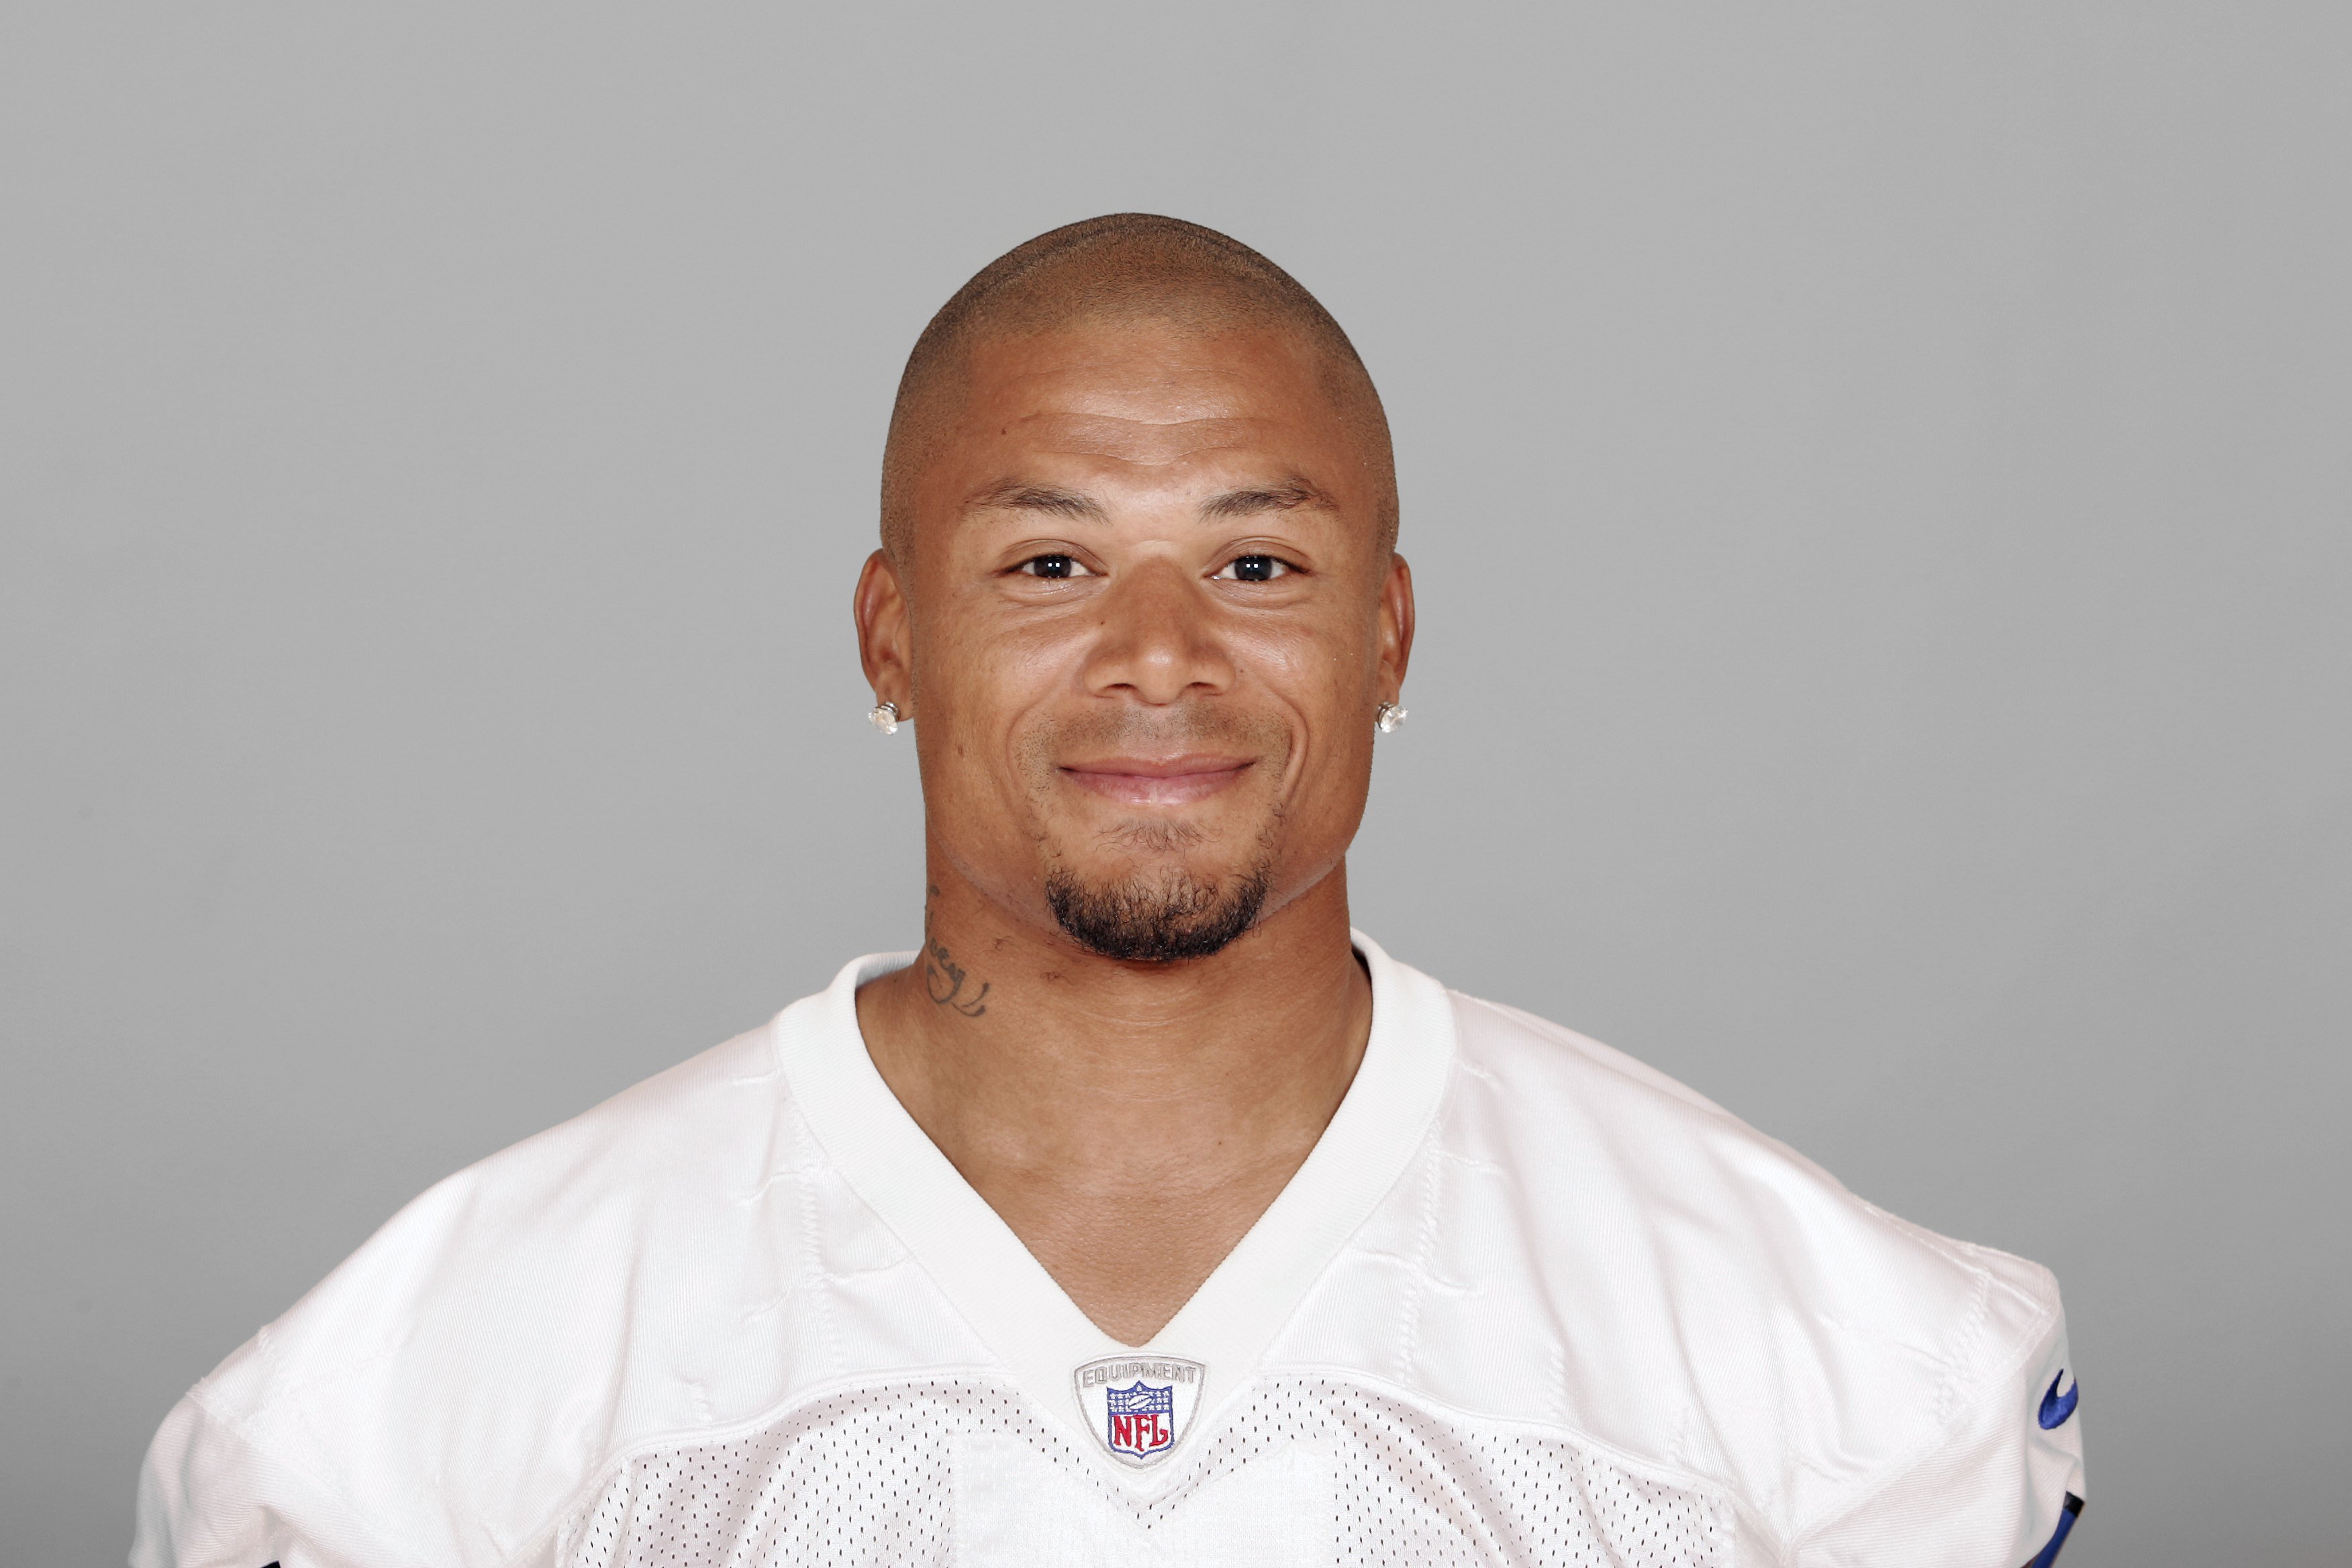 Terry Glenn of the Dallas Cowboys poses for his 2007 NFL headshot at photo day in Irving, Texas | Photo: Getty Images